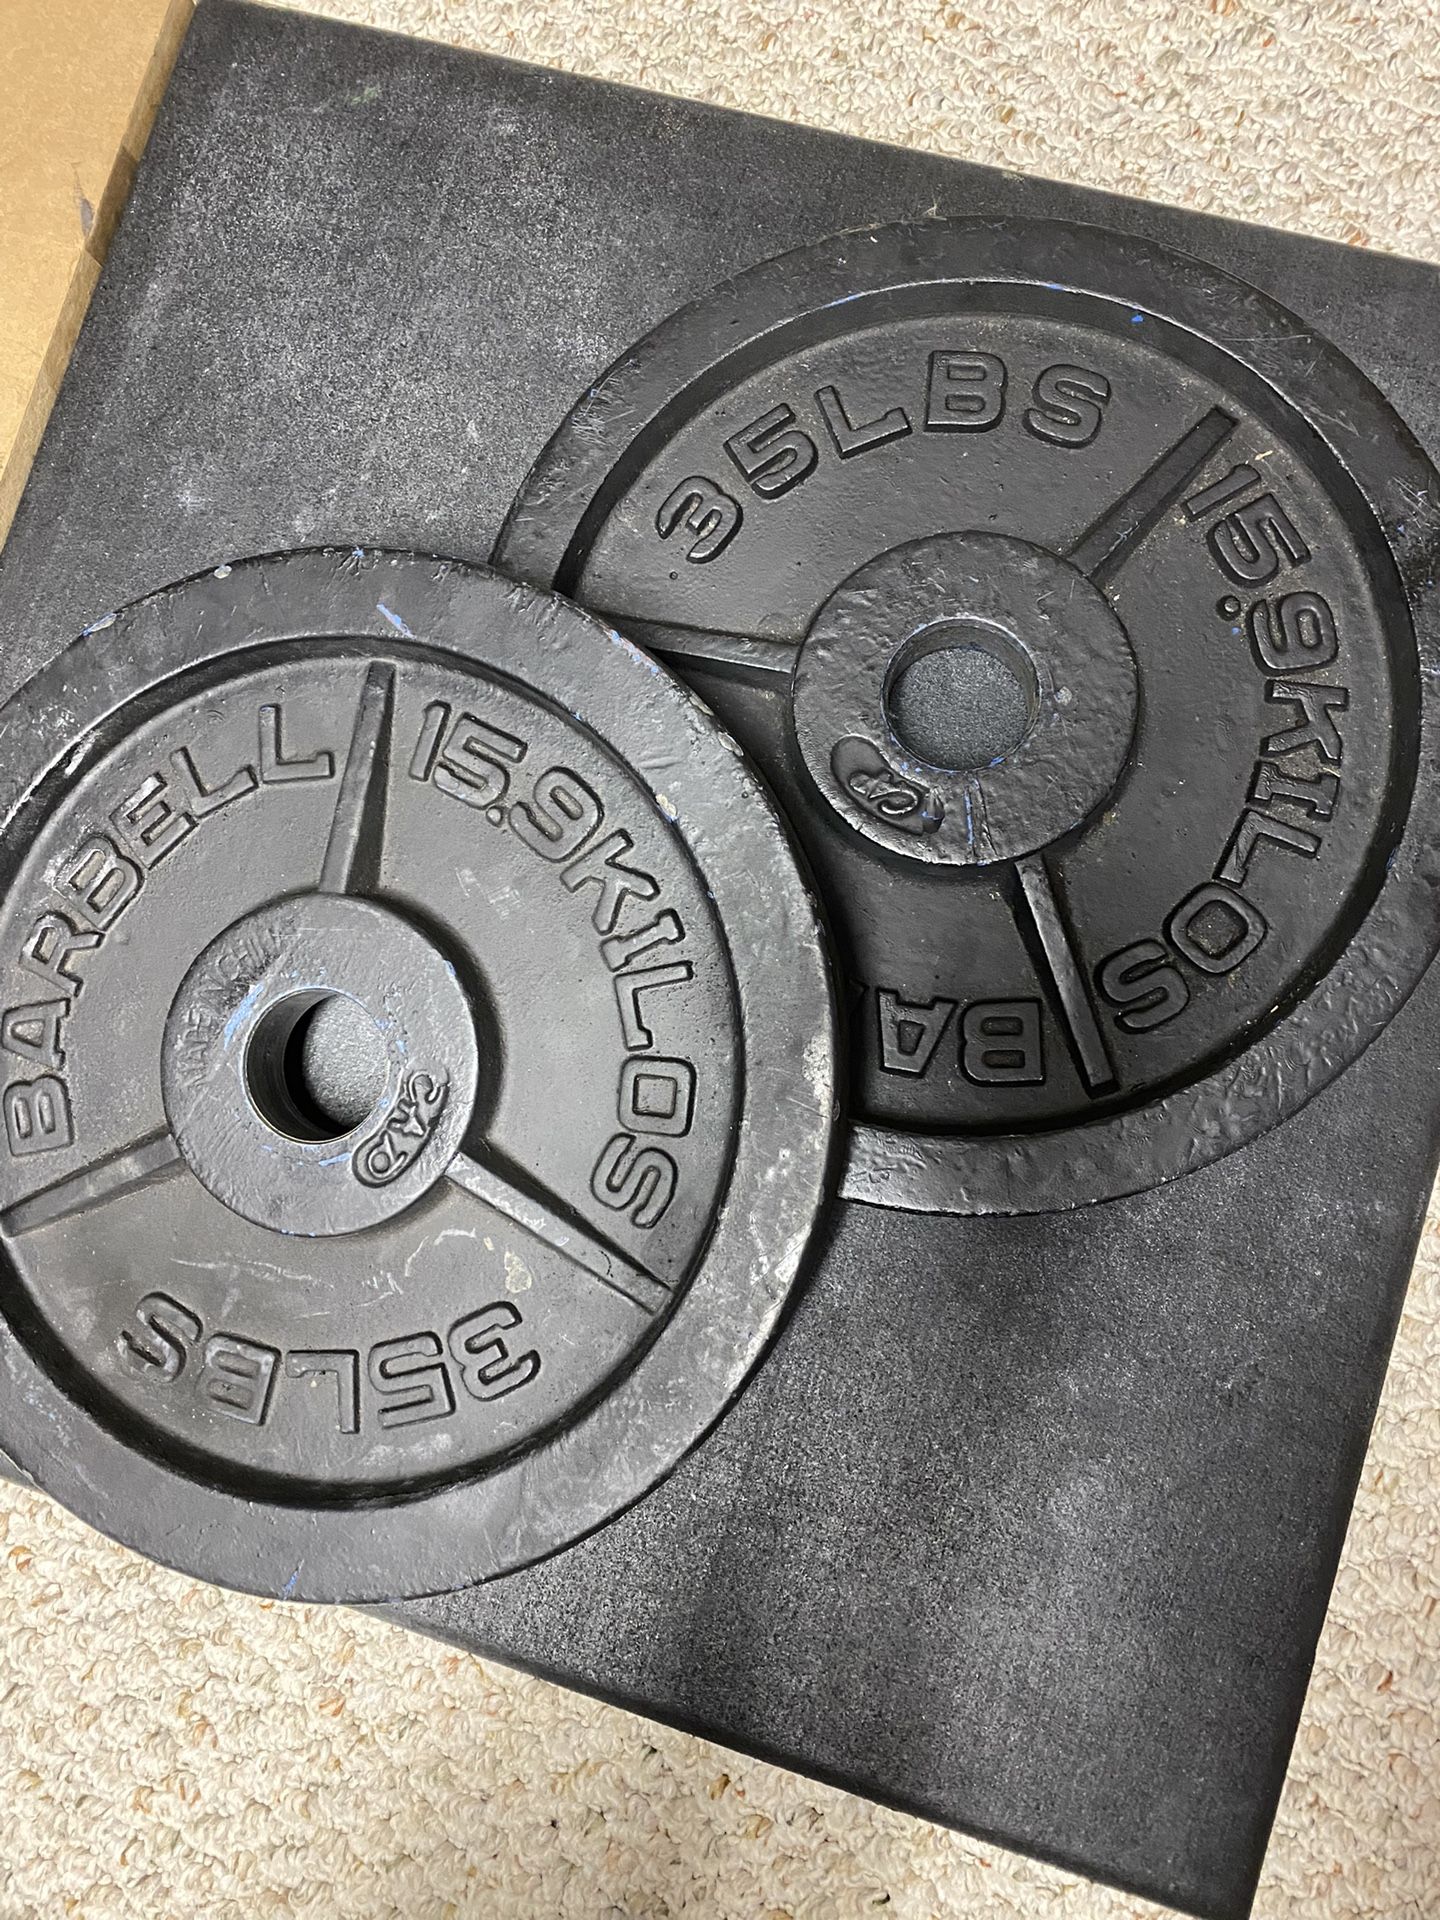 2 35lb Olympic Weight Plates